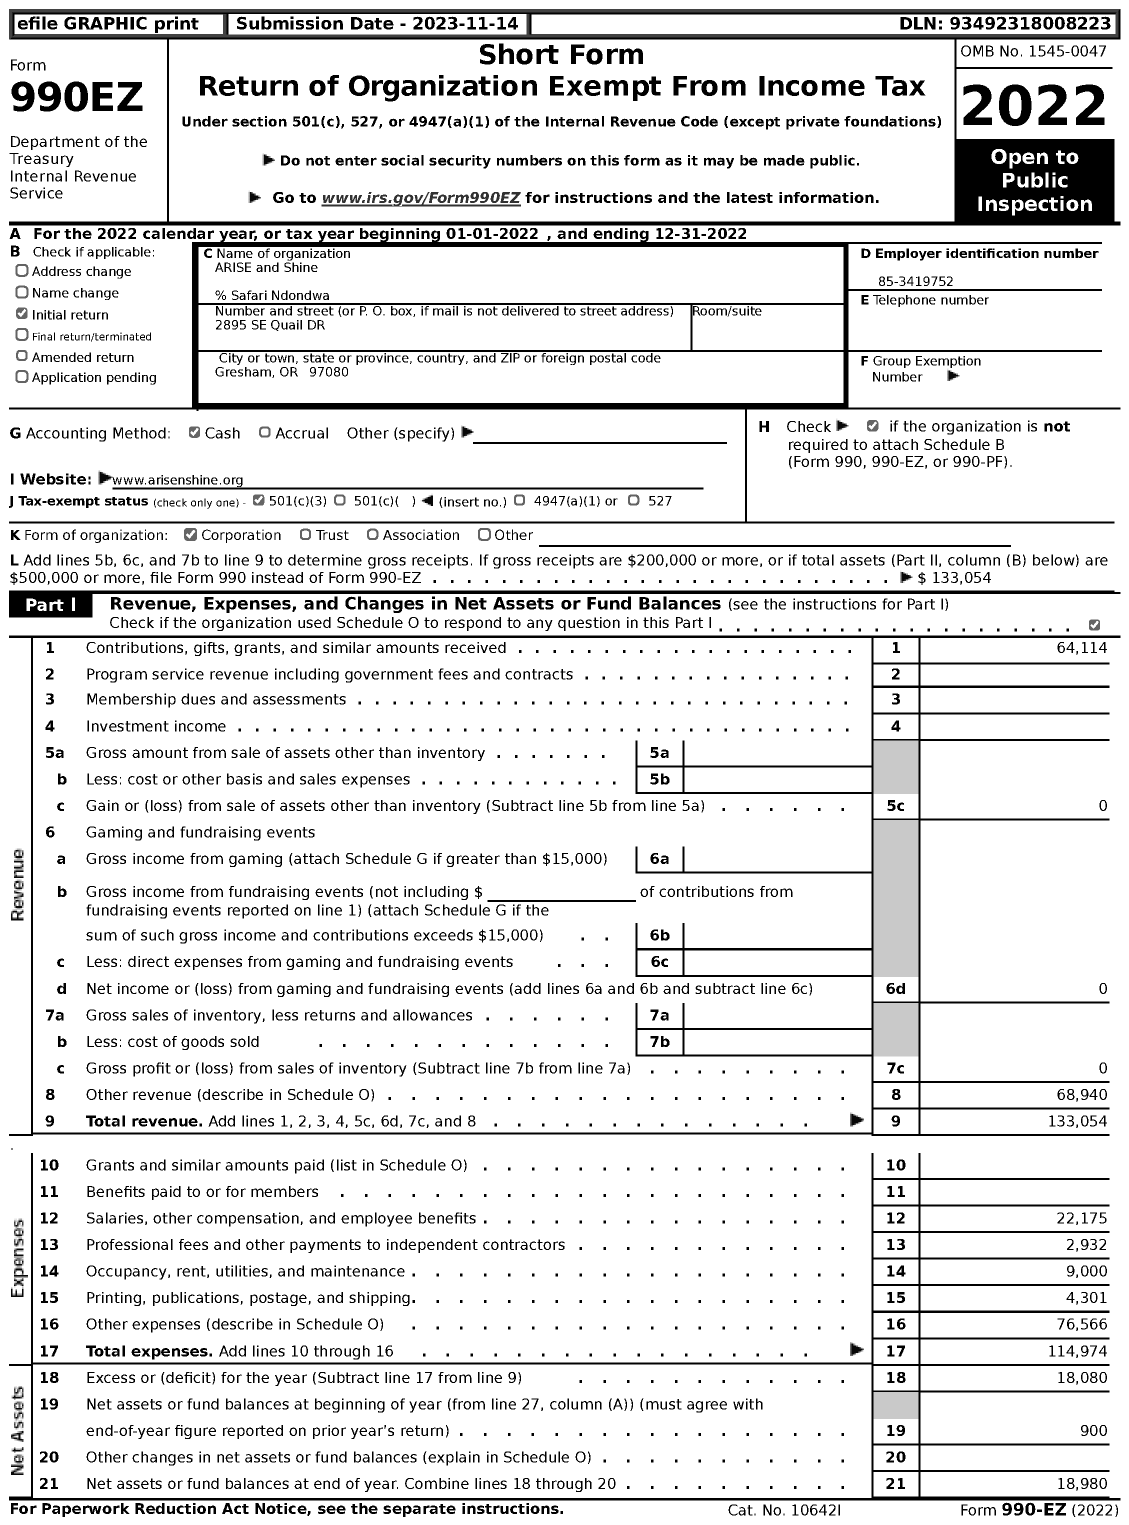 Image of first page of 2022 Form 990EZ for ARISE and Shine